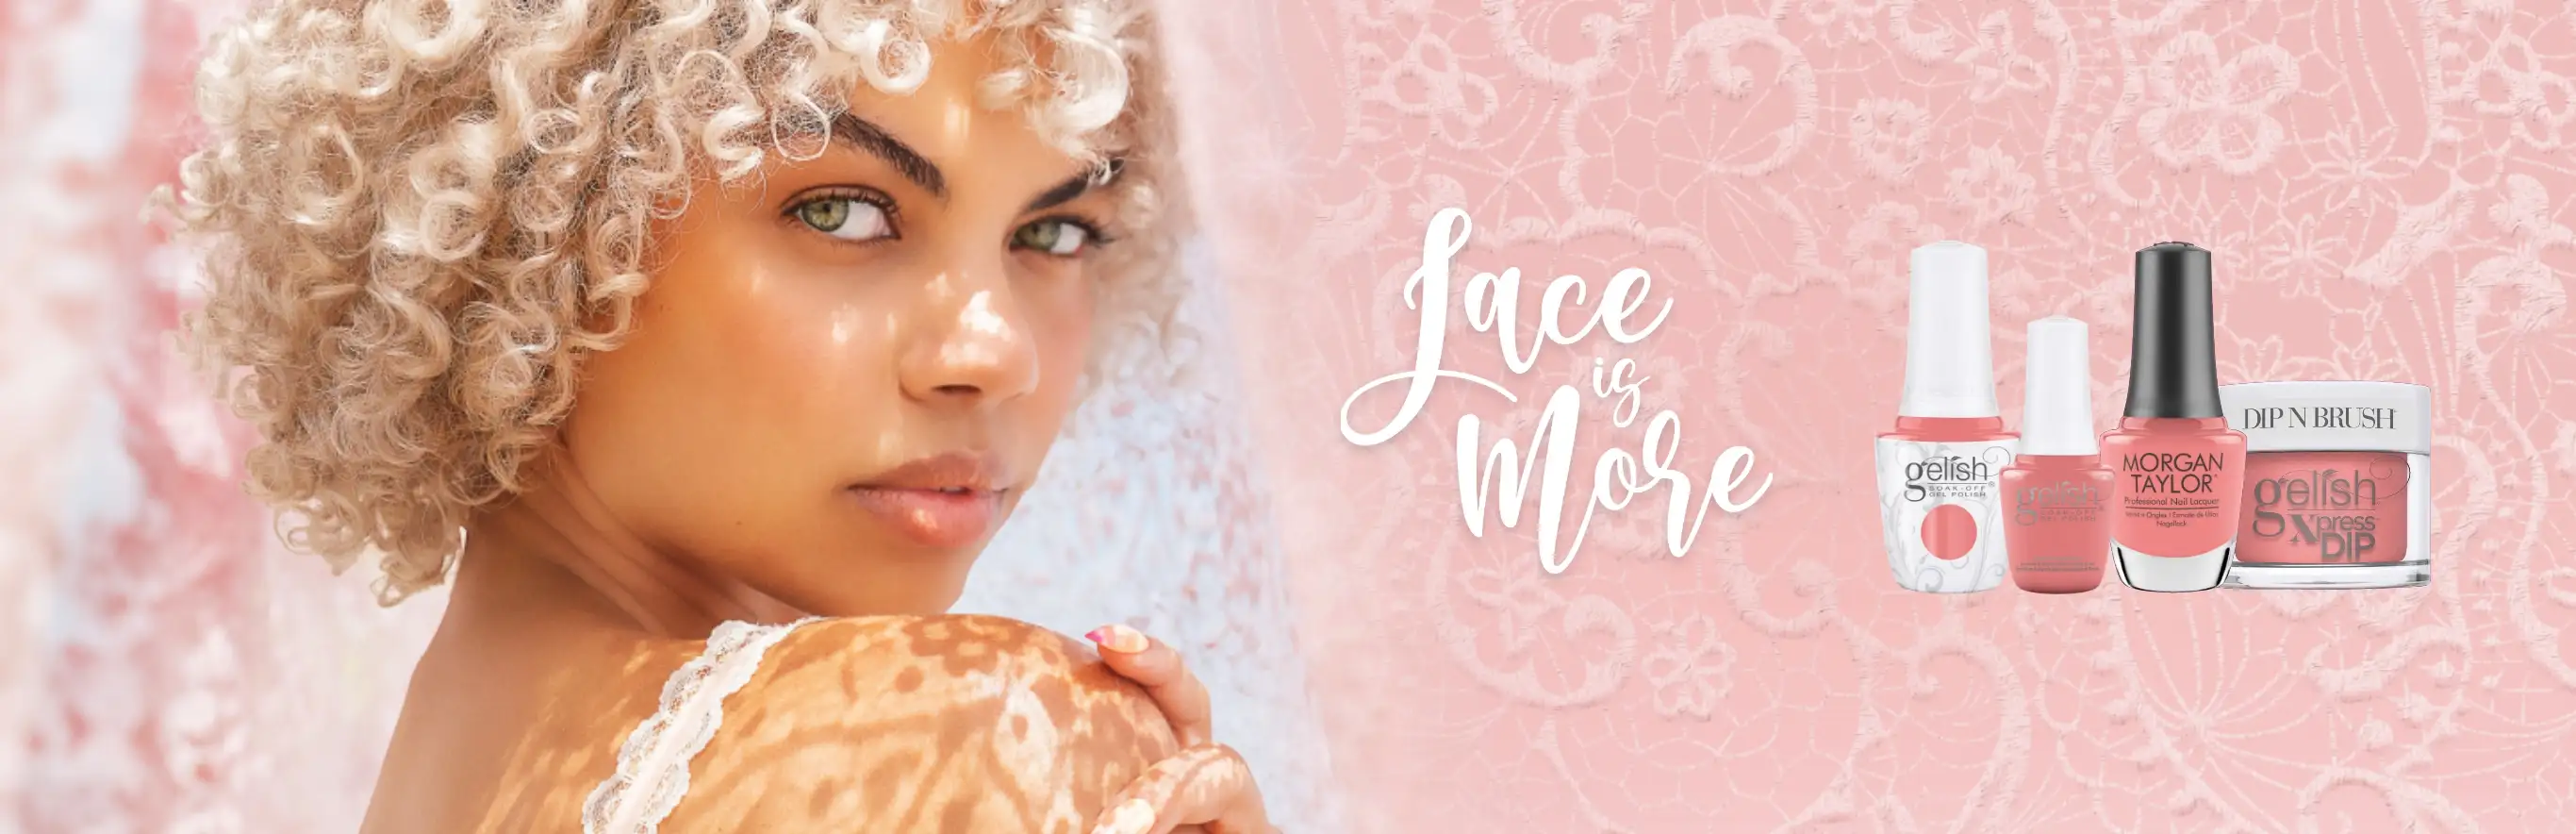 LACE IS MORE